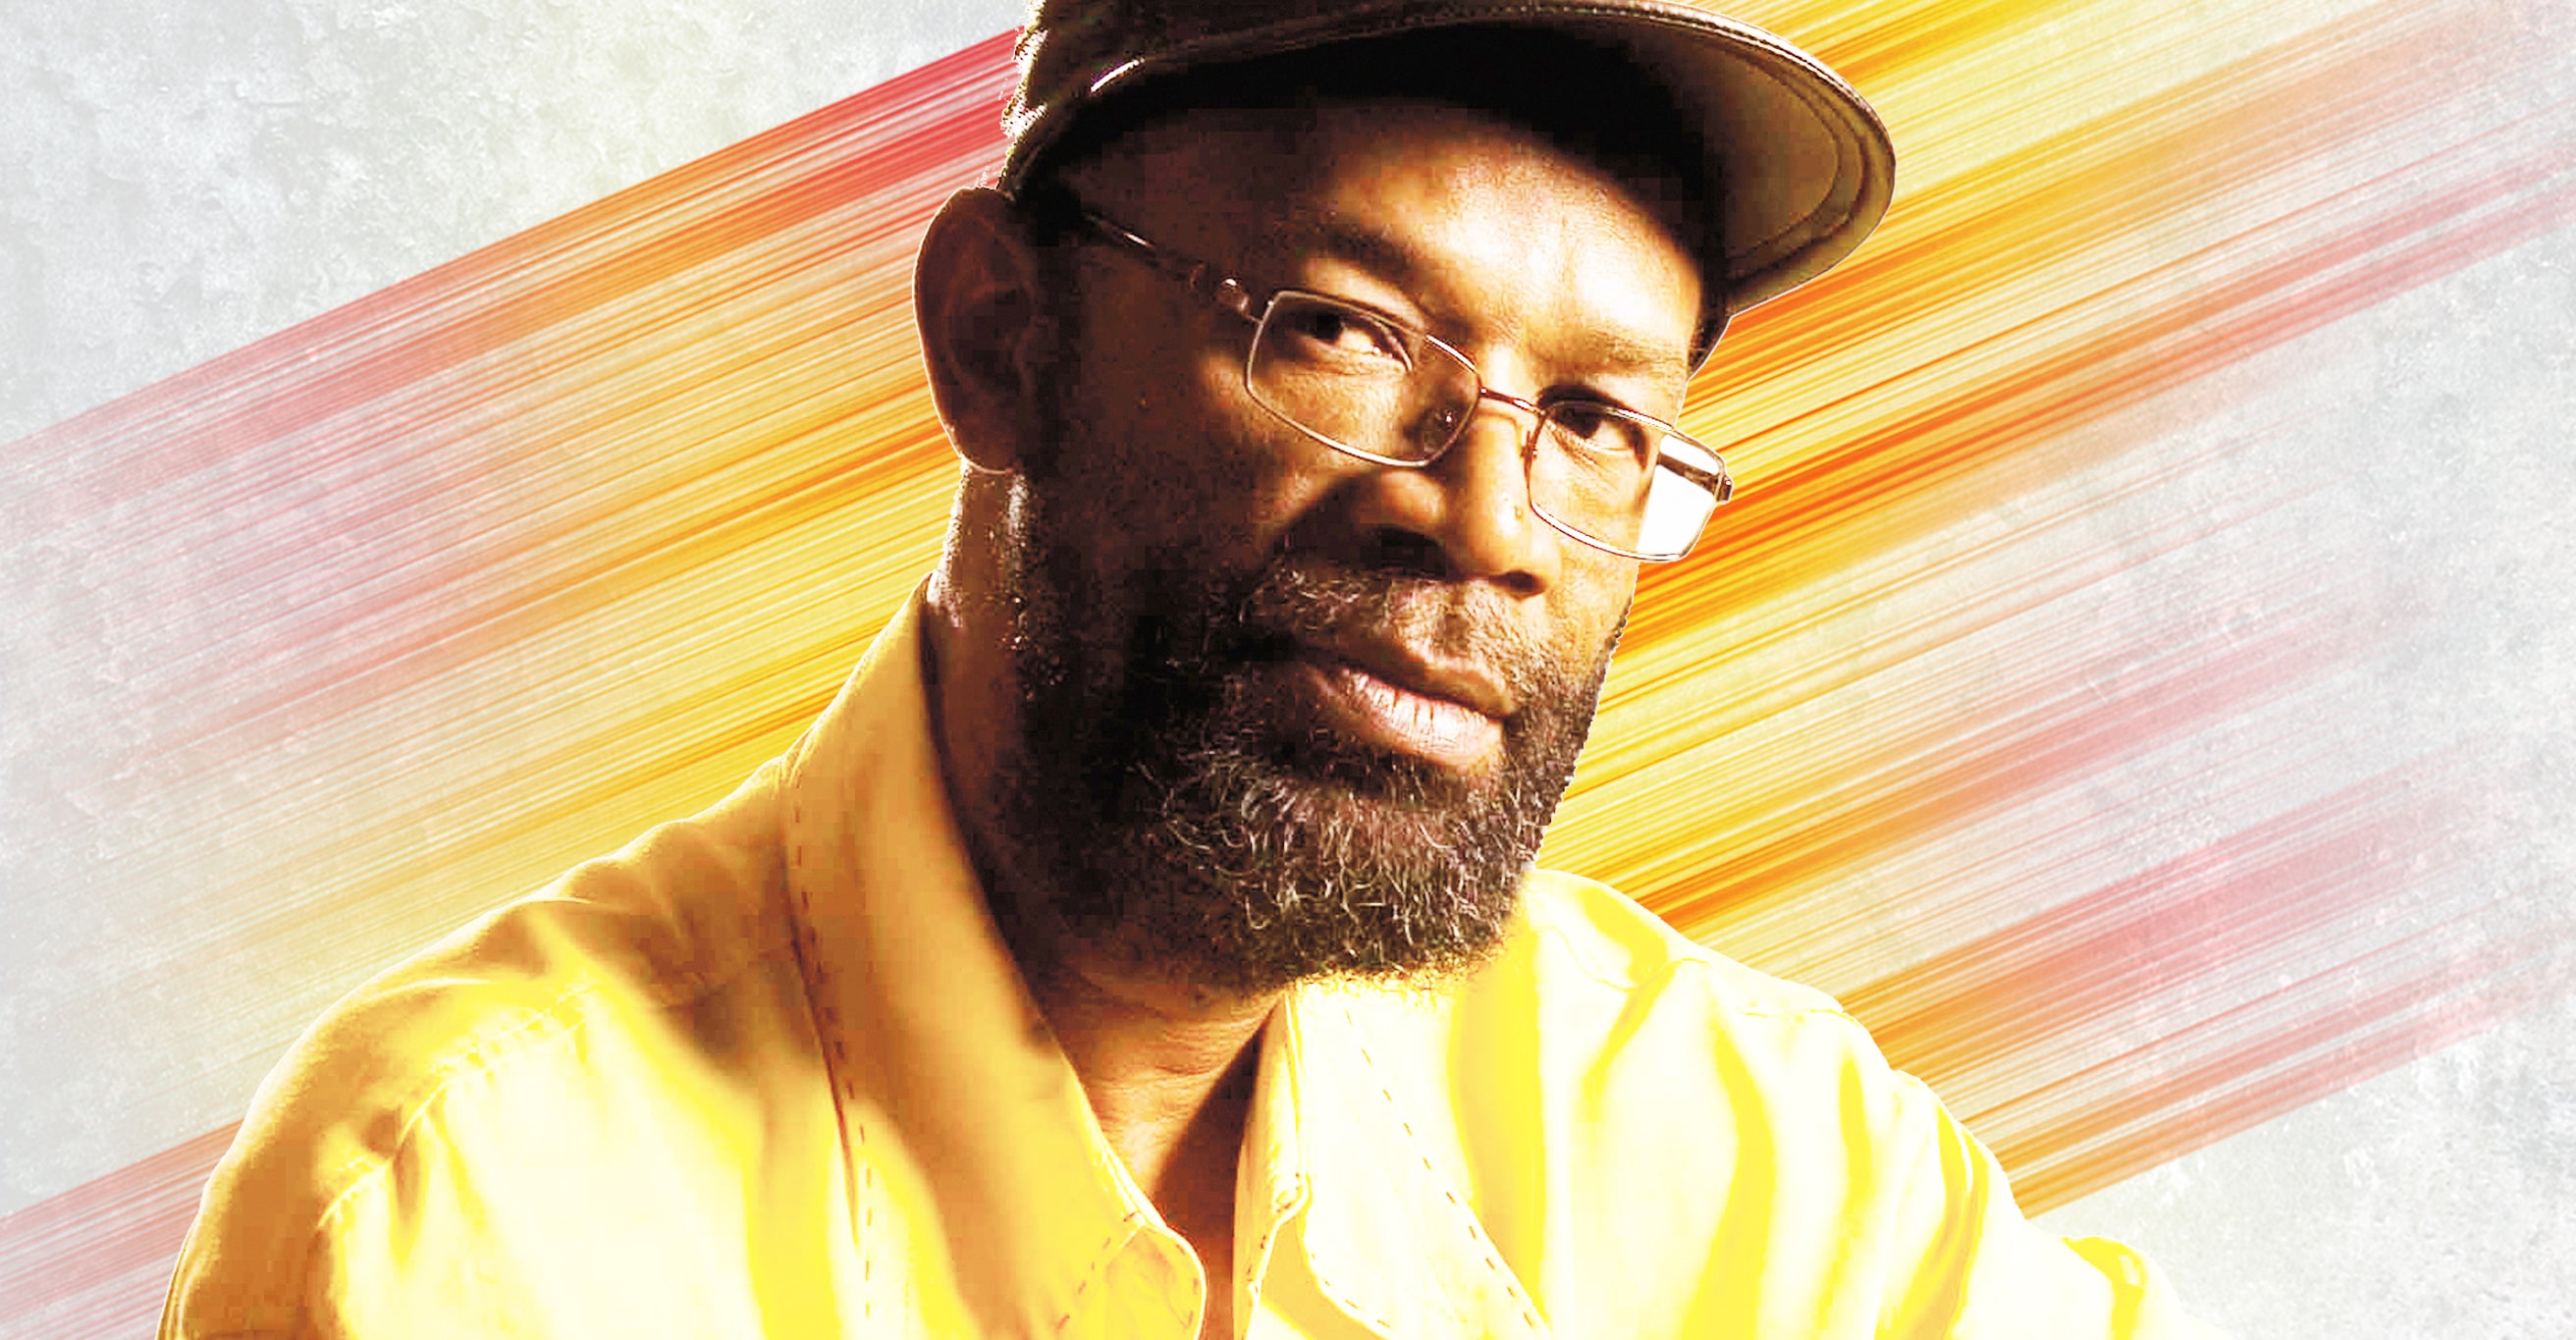 Beres Hammond w/ Mikey Spice at College Street Music Hall